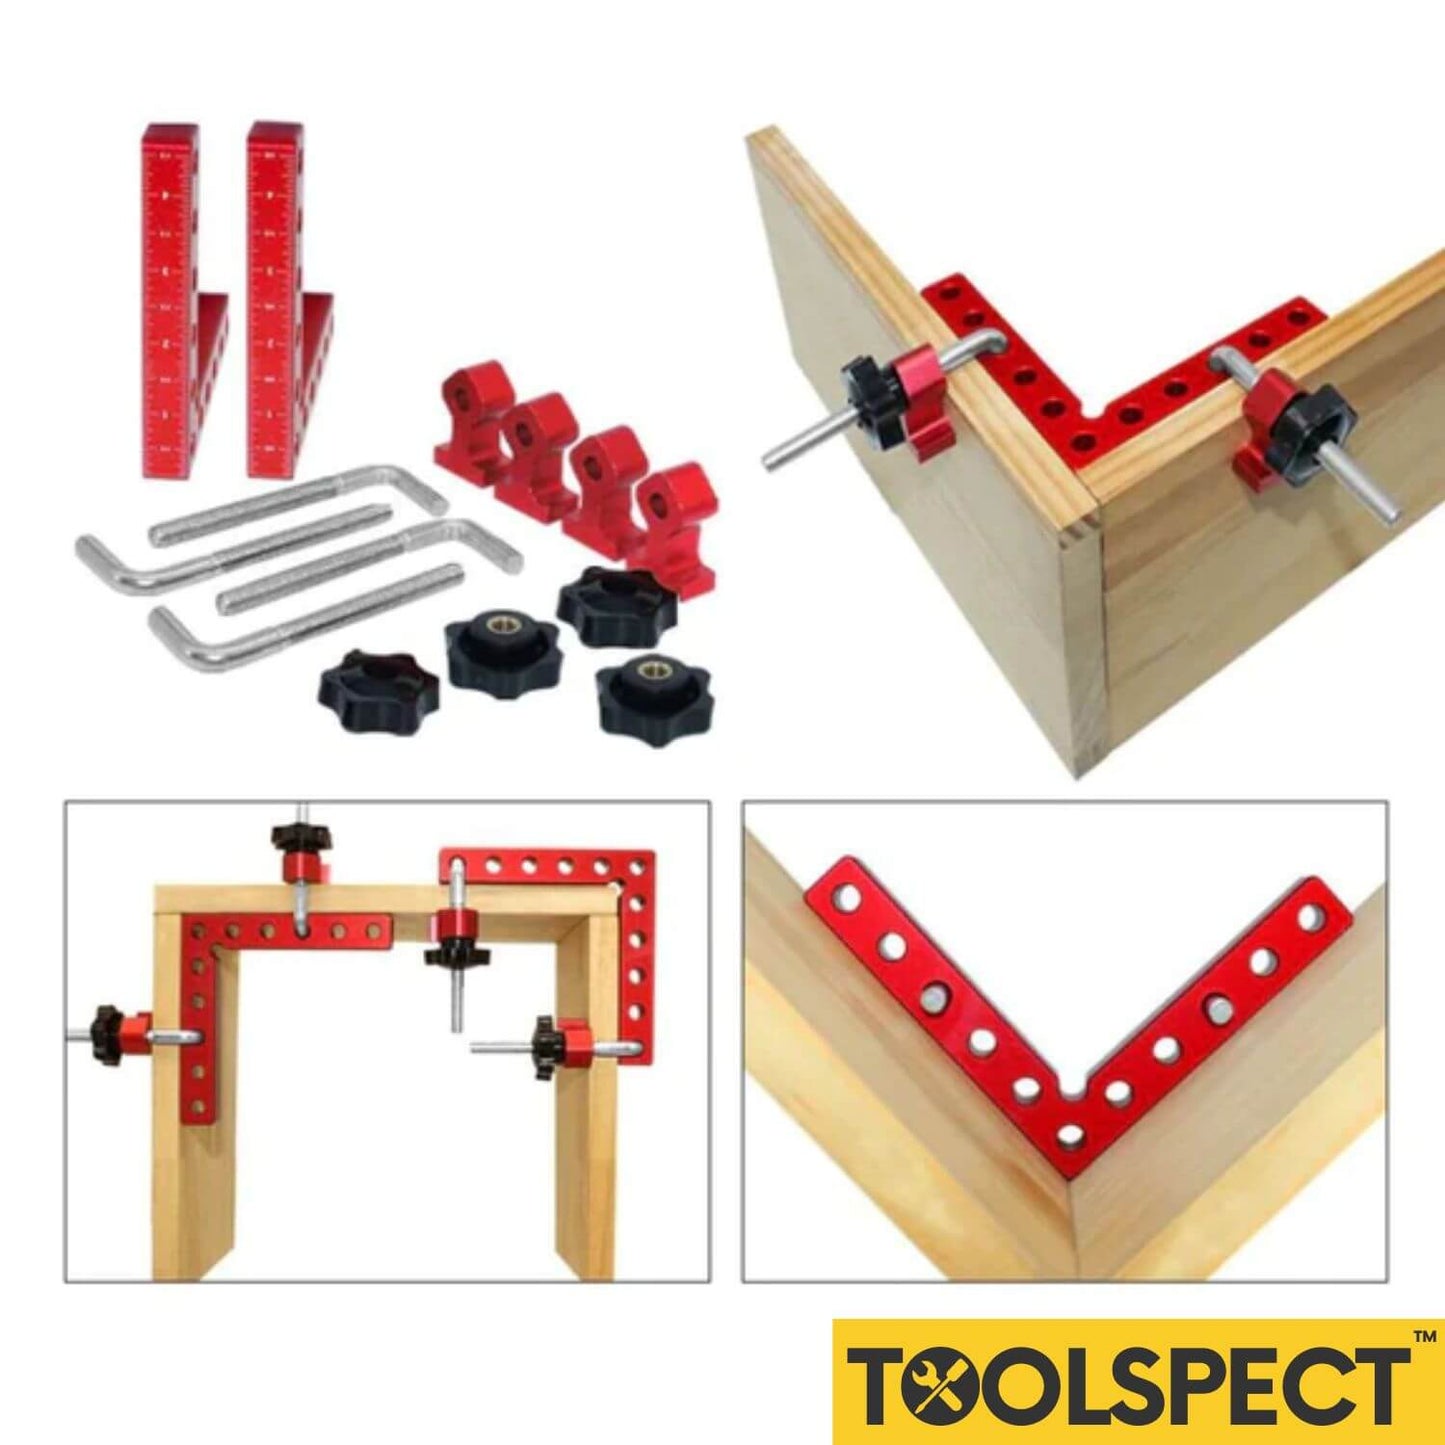 TOOLSPECT™ Precision Clamping Squares (4-3/4")